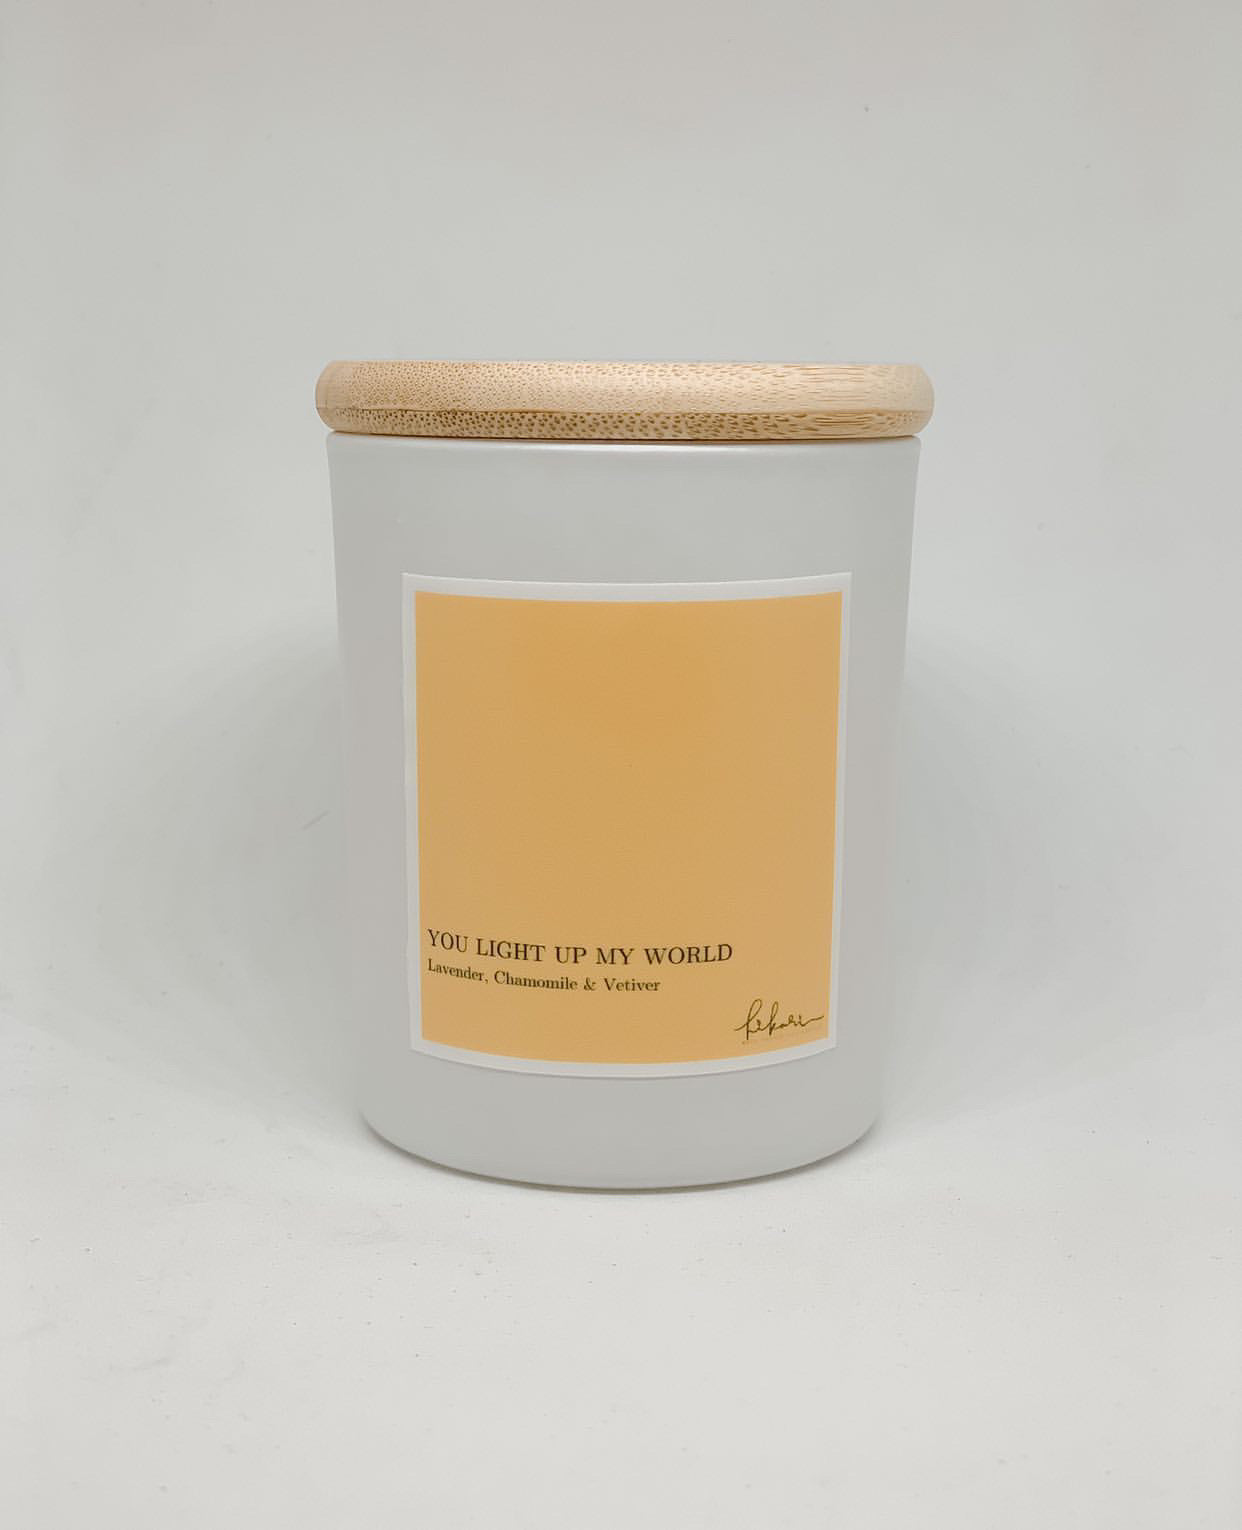 Hikari Scented Soy Candle - You Light Up My World